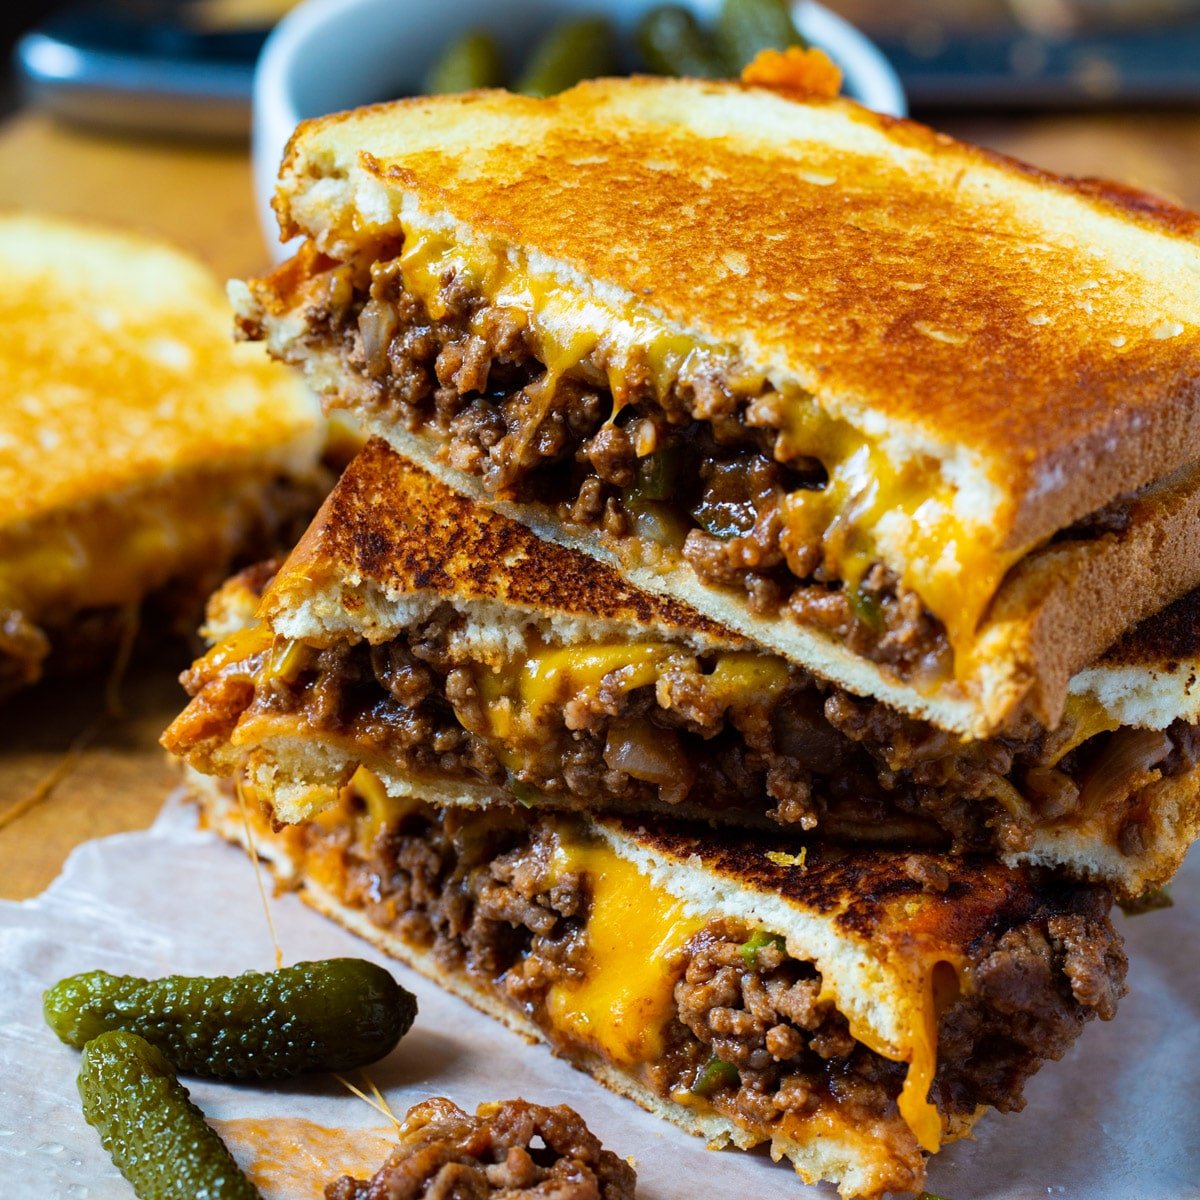 Sloppy Joe Grilled Cheese halves stacked on top of each other.